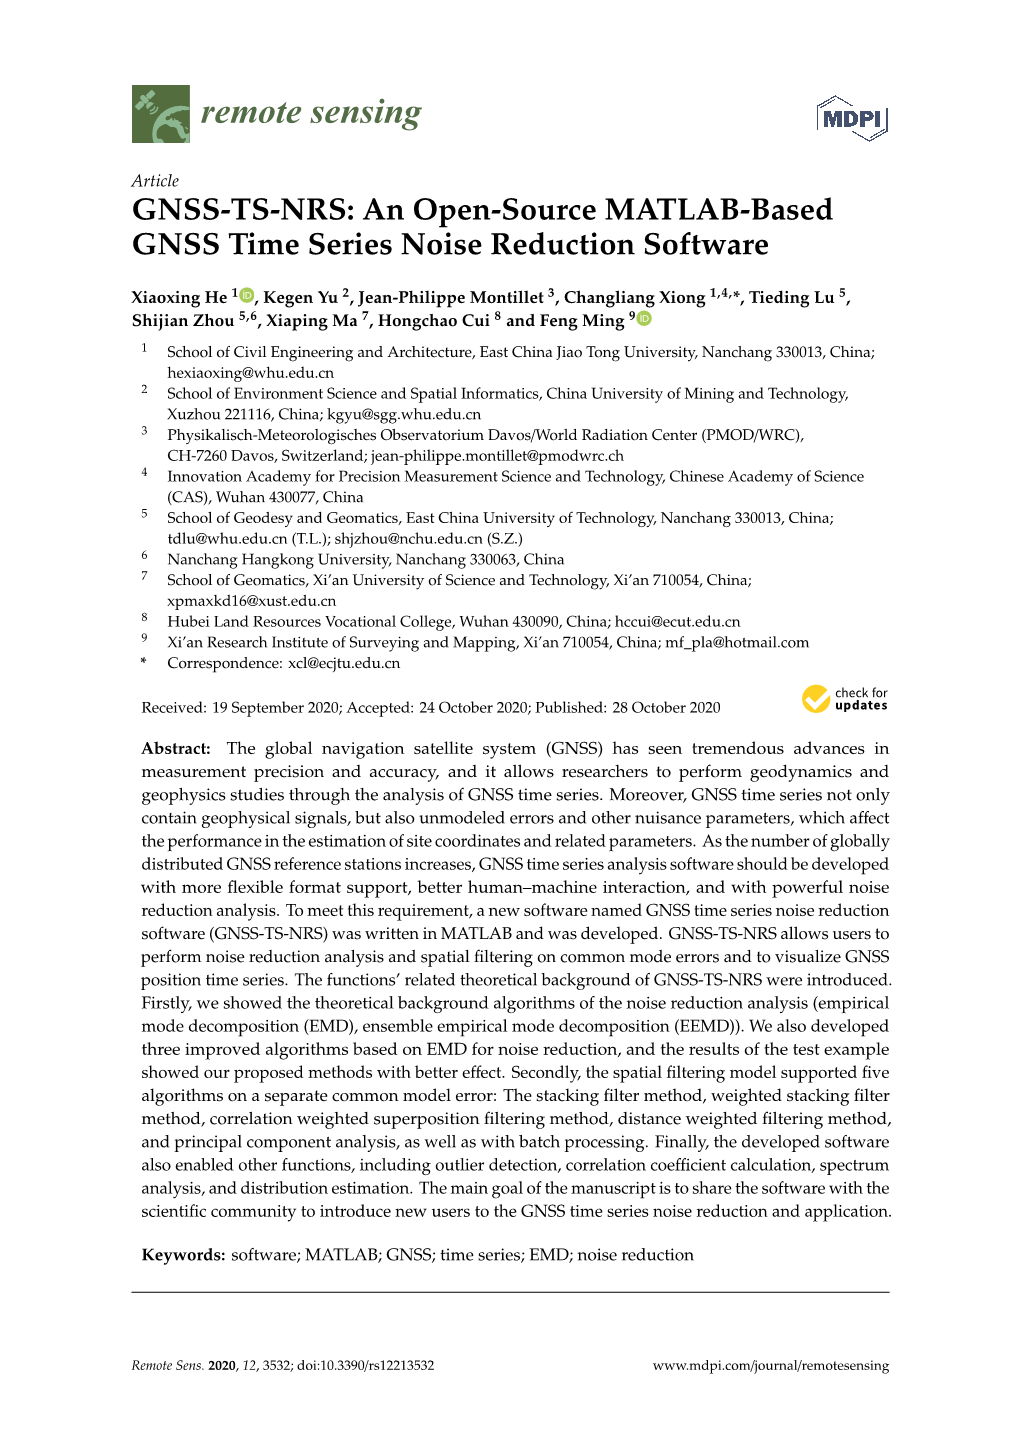 An Open-Source MATLAB-Based GNSS Time Series Noise Reduction Software